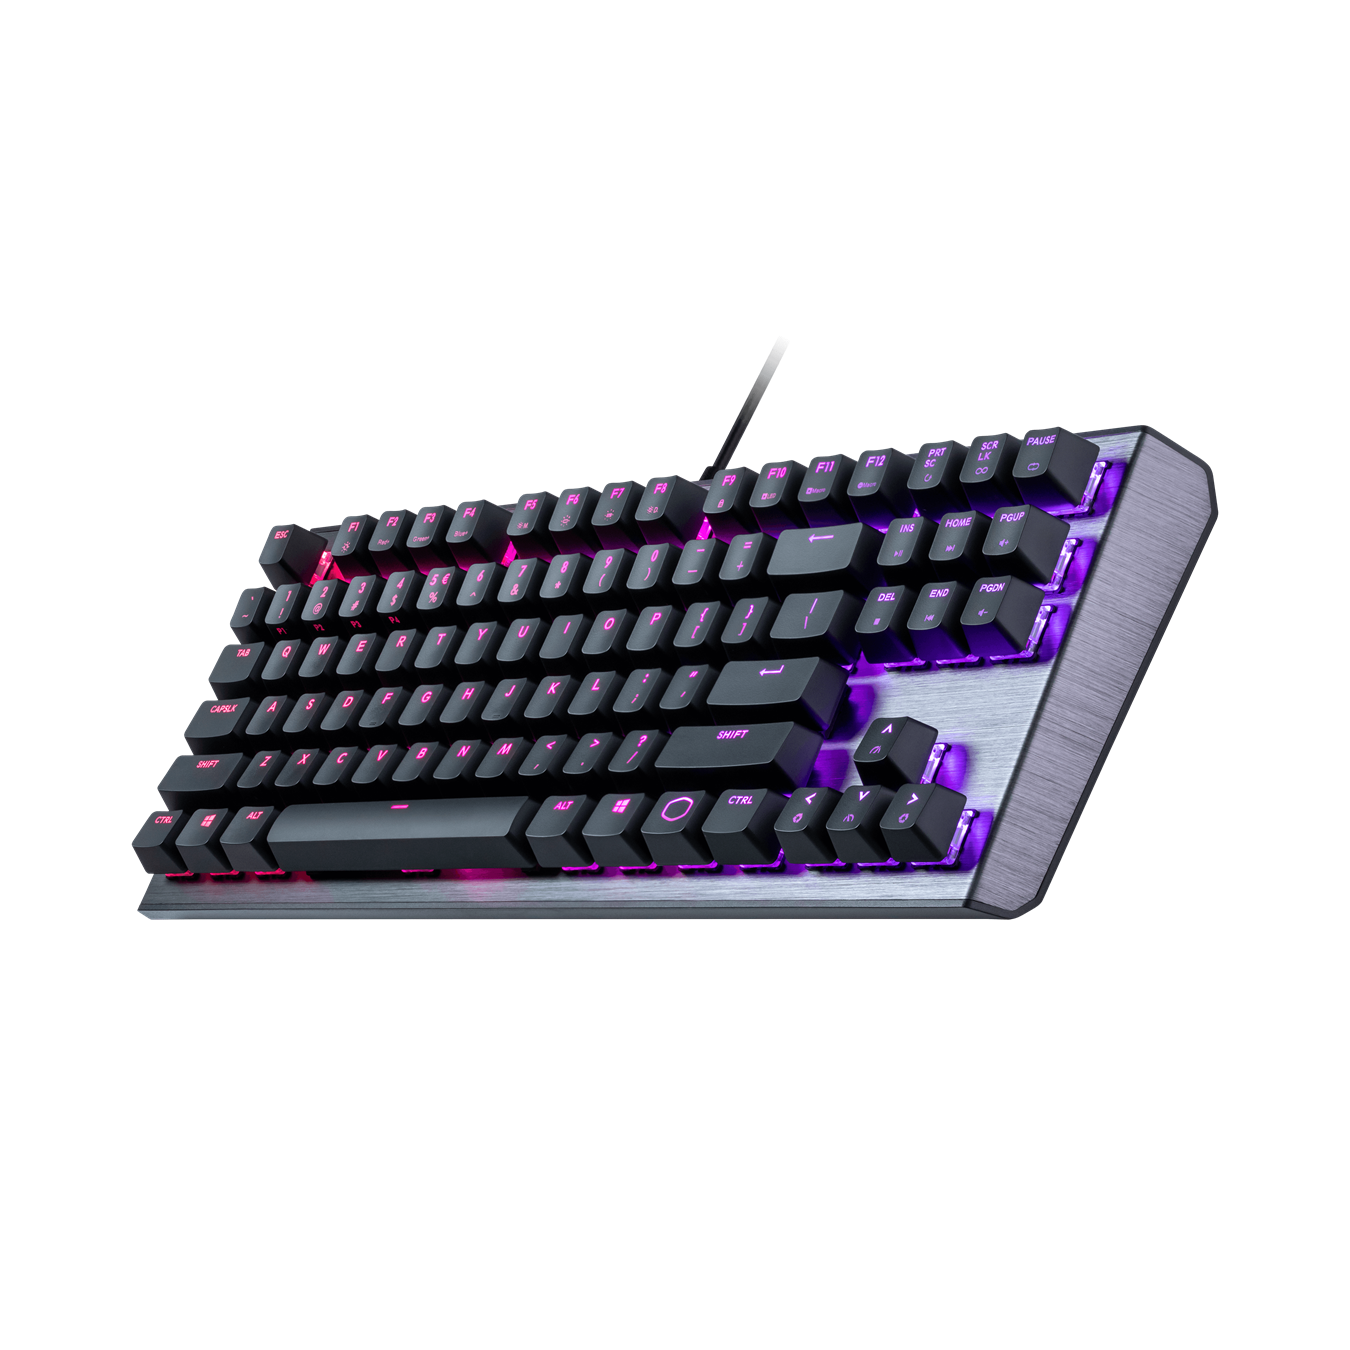 CK530 Mechanical Gaming Keyboard - Per-key LEDs with multiple lighting modes and effects to highlight all your dominating killstreaks